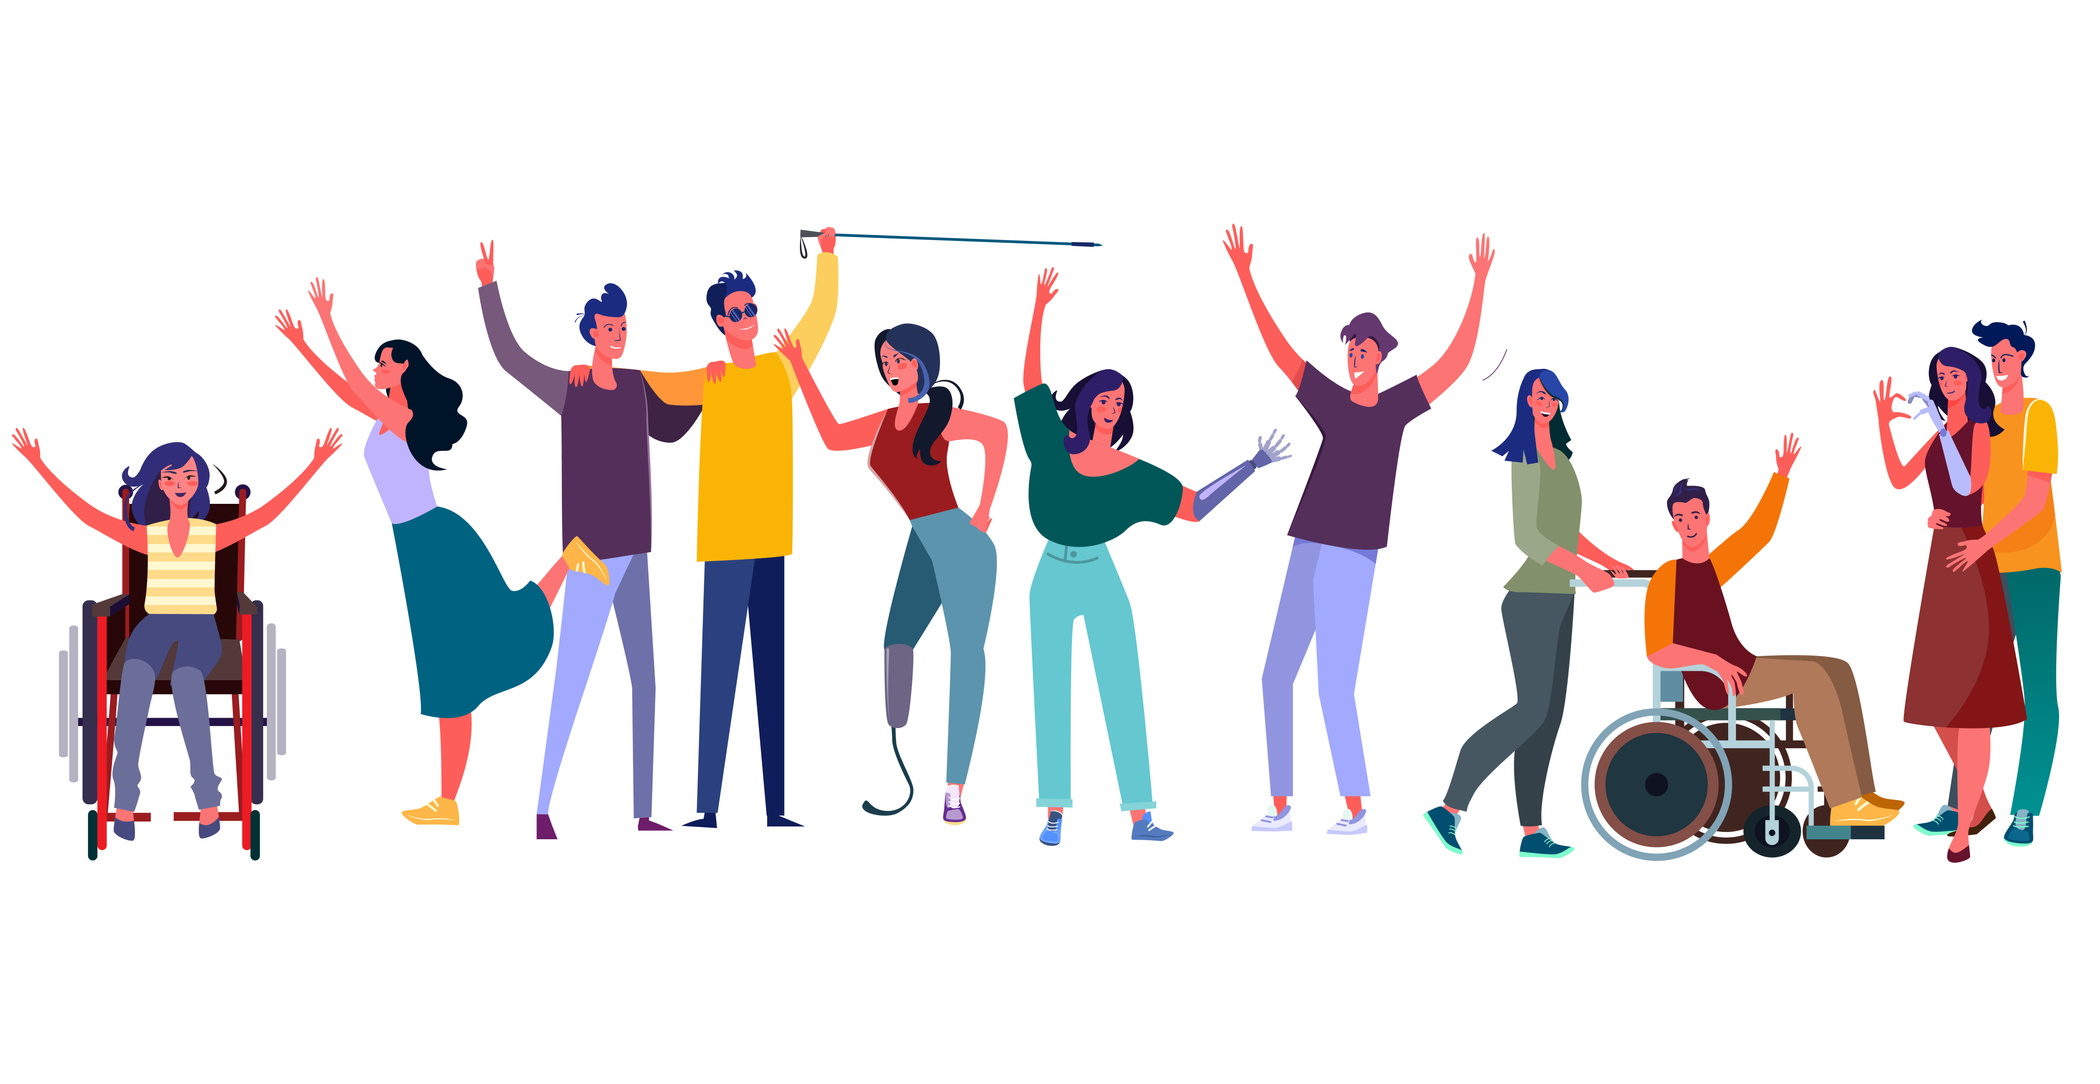 Illustration of a group of people with a variety of disabilities cheering